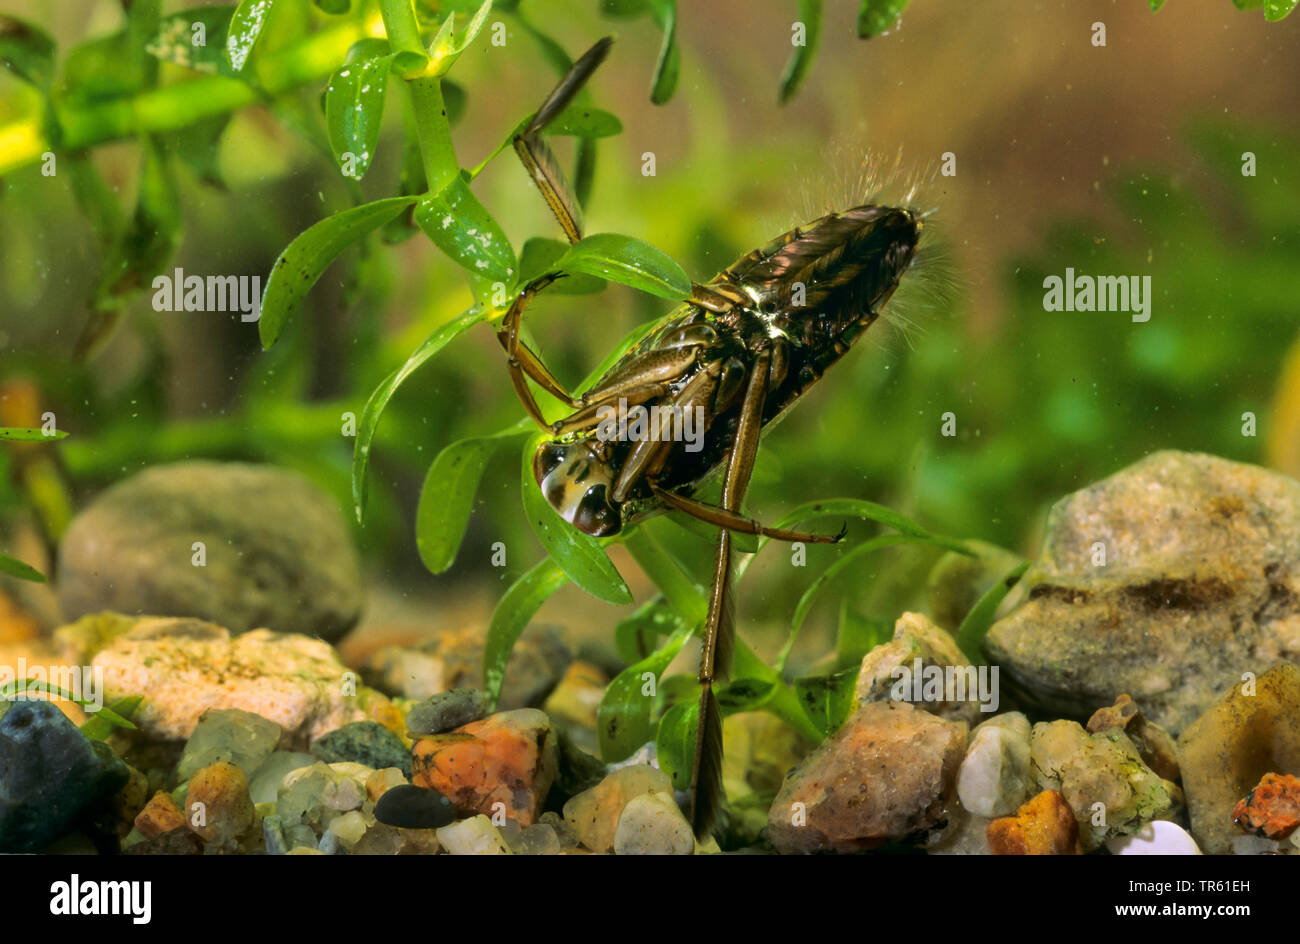 common backswimmer, backswimmer, notonectid, notonectids (Notonecta glauca), underwater, side of the belly, Germany Stock Photo